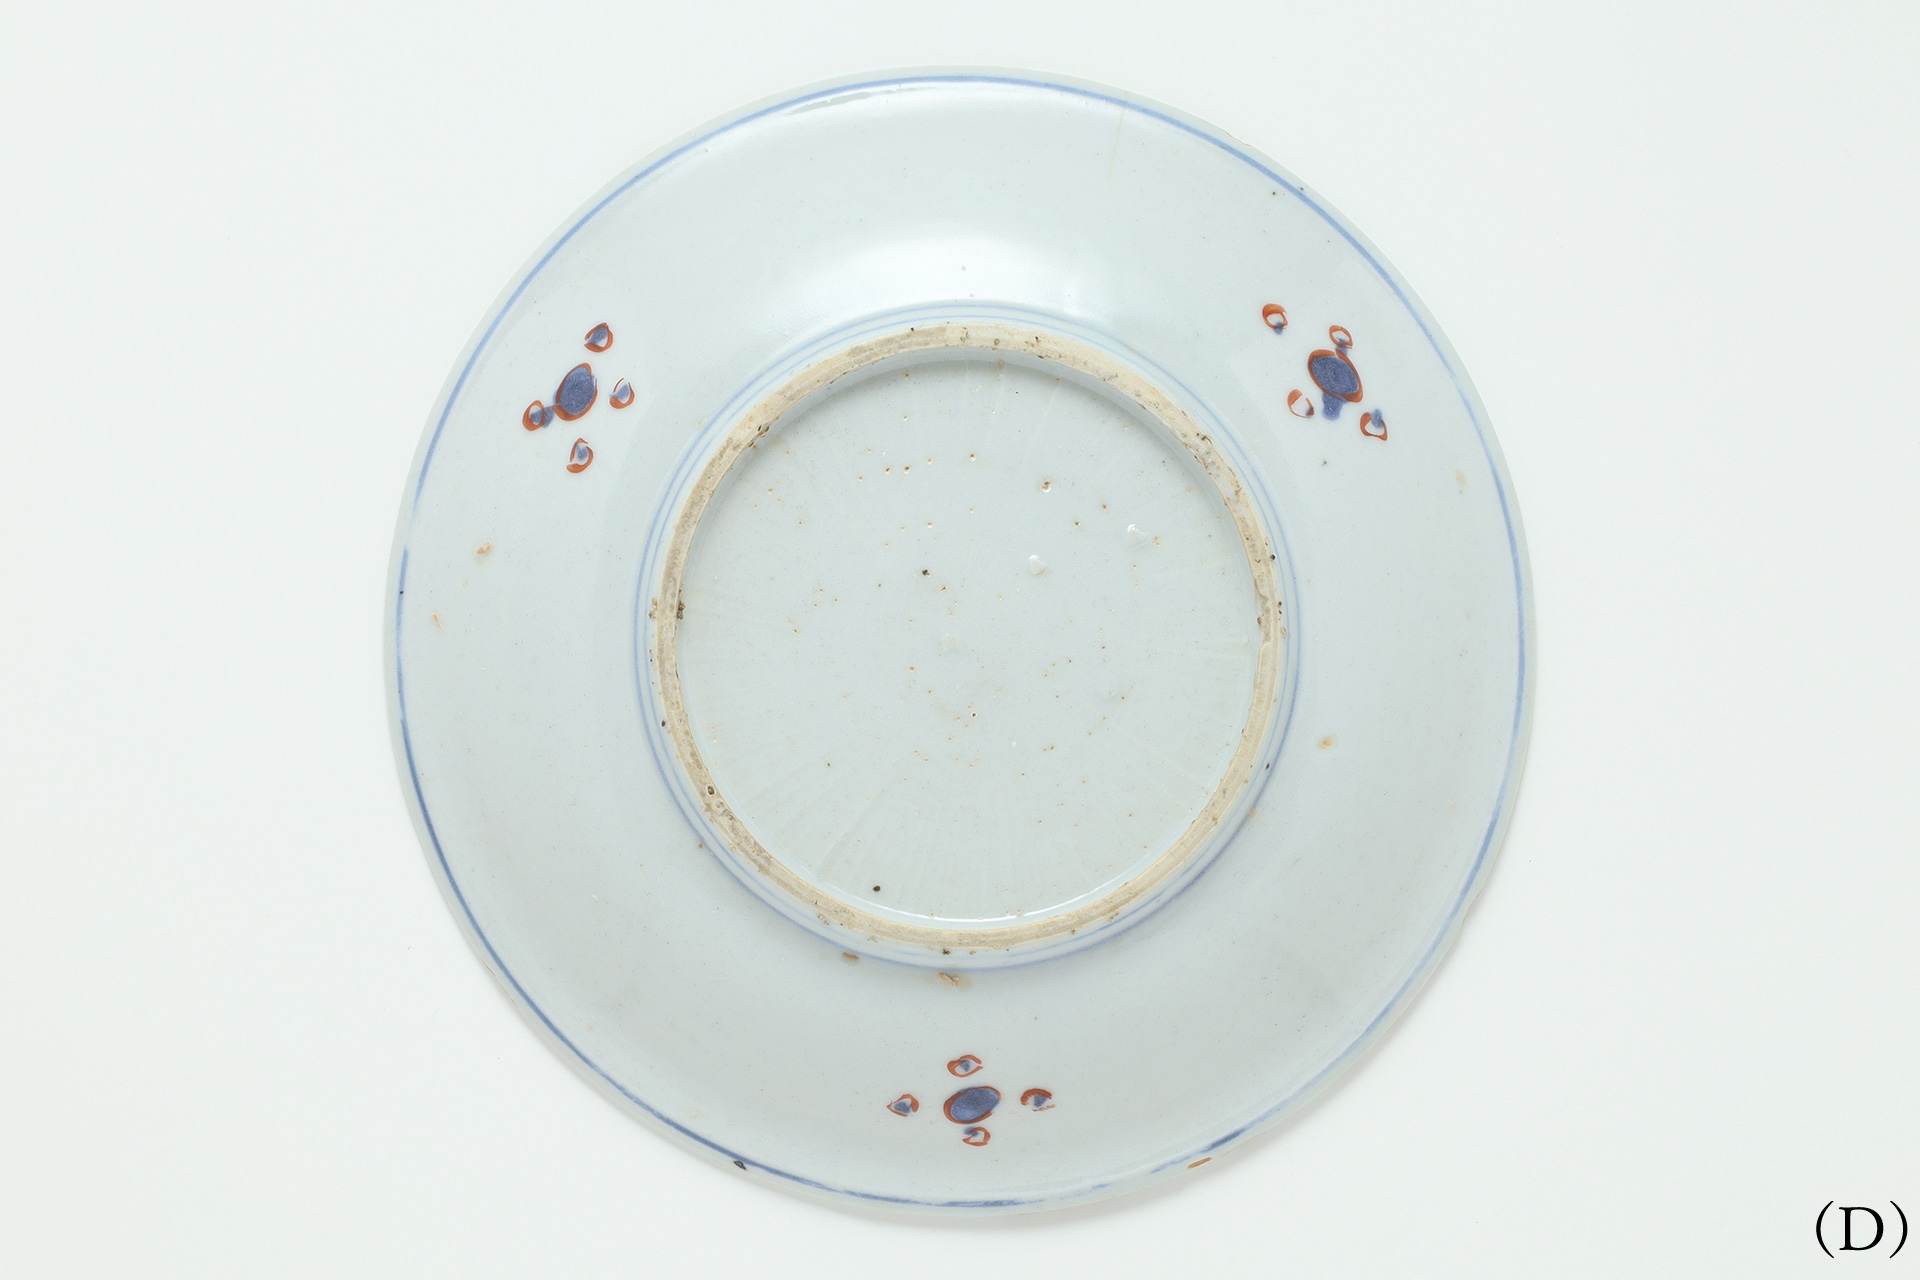 Tenkei-Akae Small Dish with Design of Rabbit（5 Pieces / Ming Dynasty）-3d